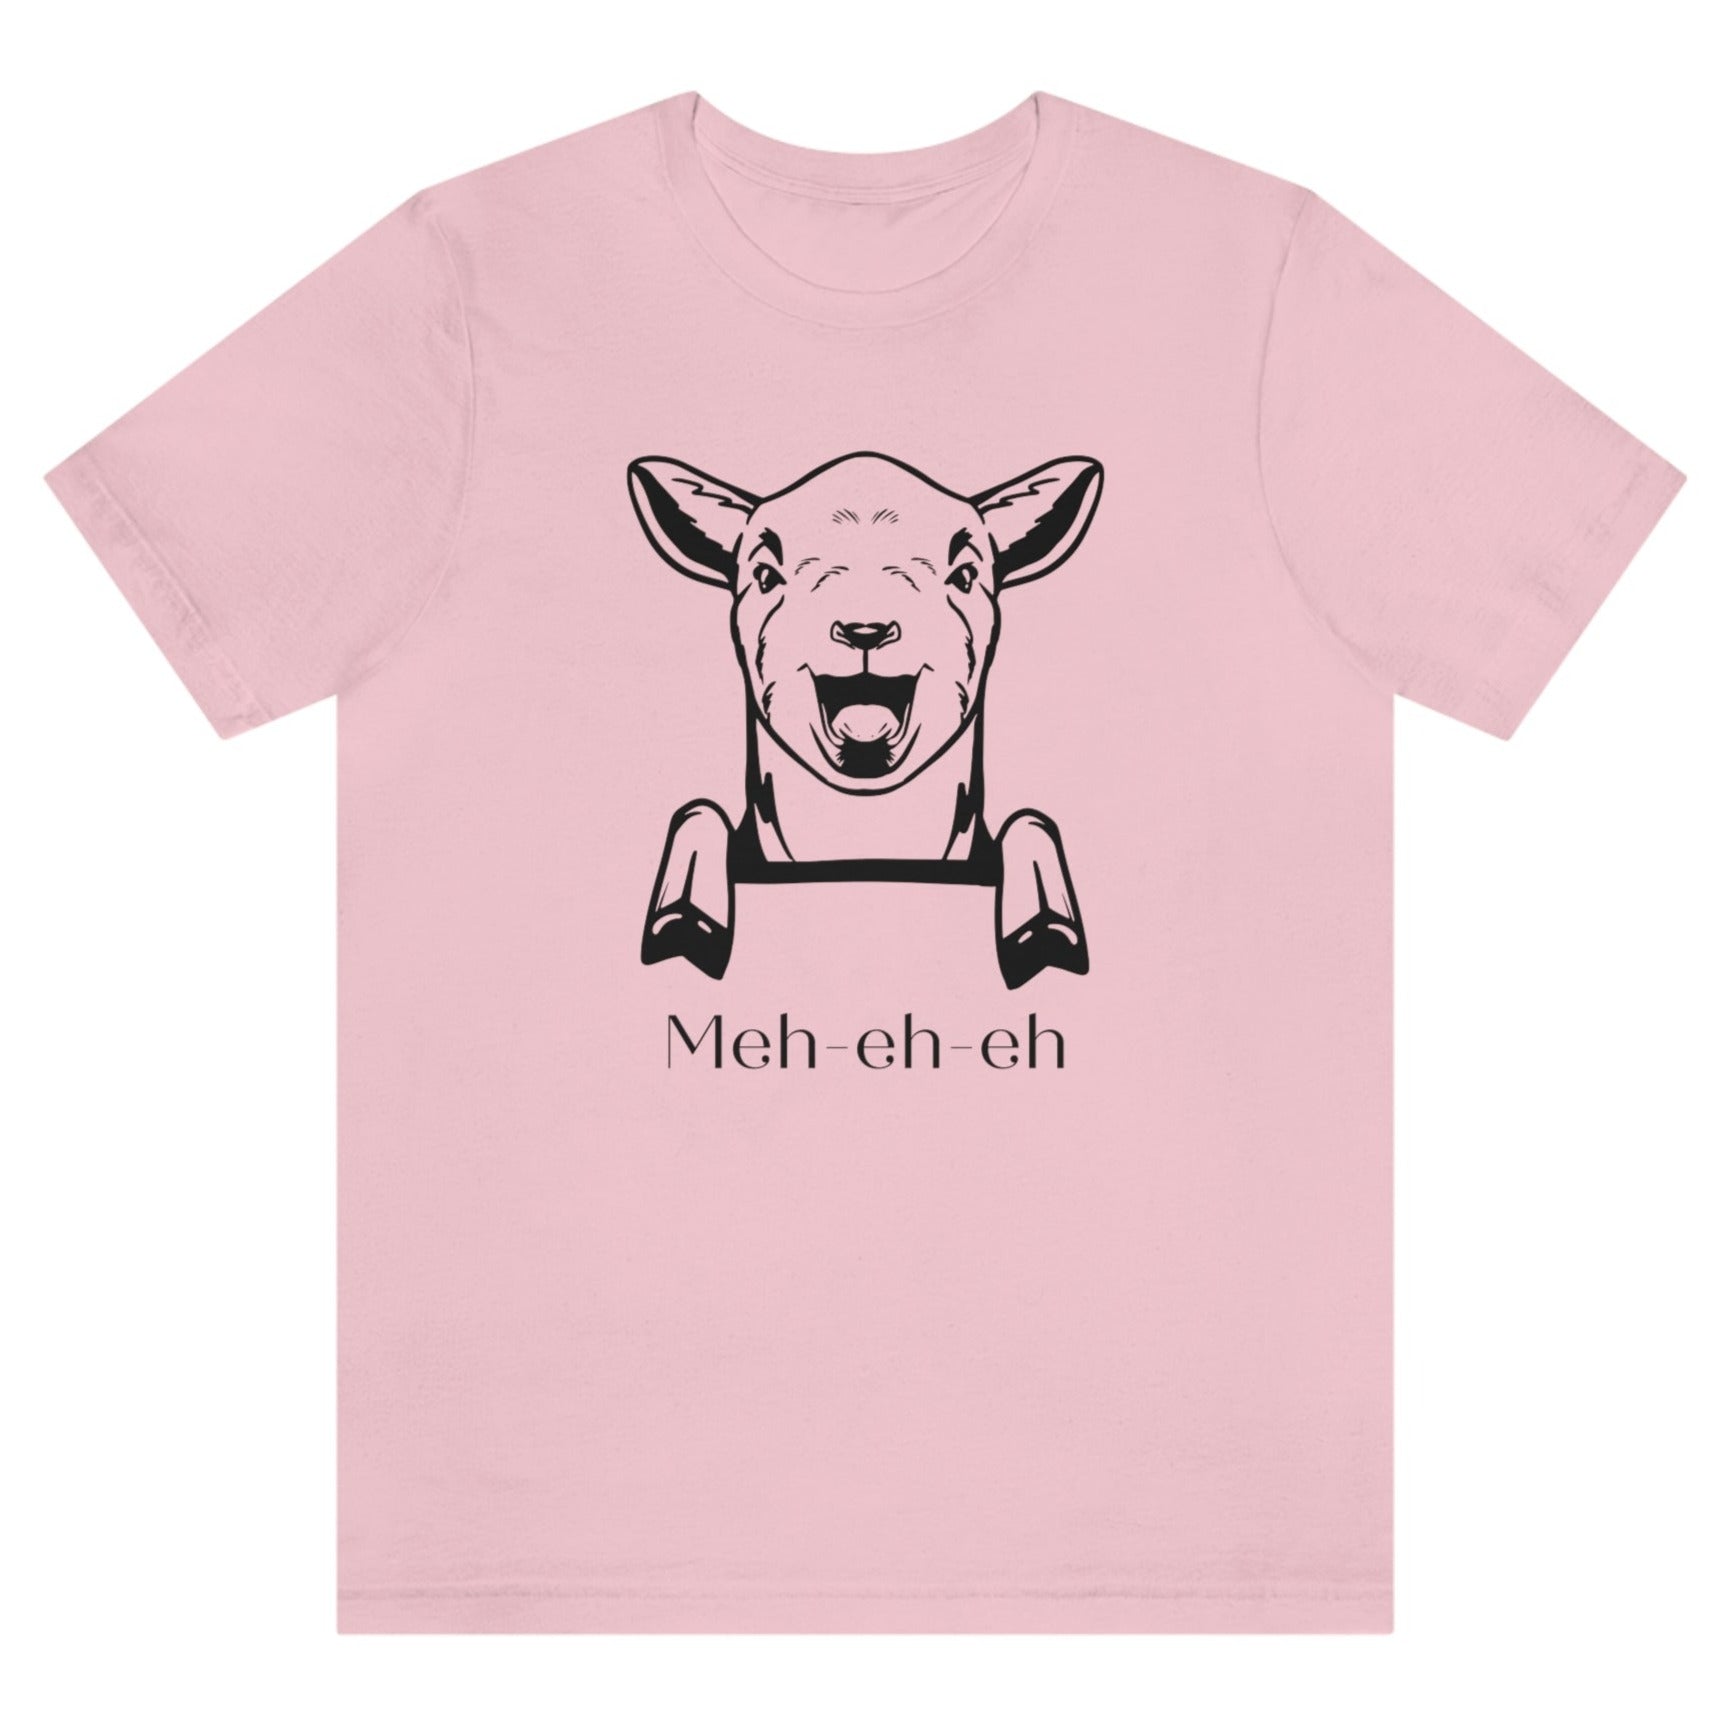    the-meh-eh-eh-sheep-pink-t-shirt-womens